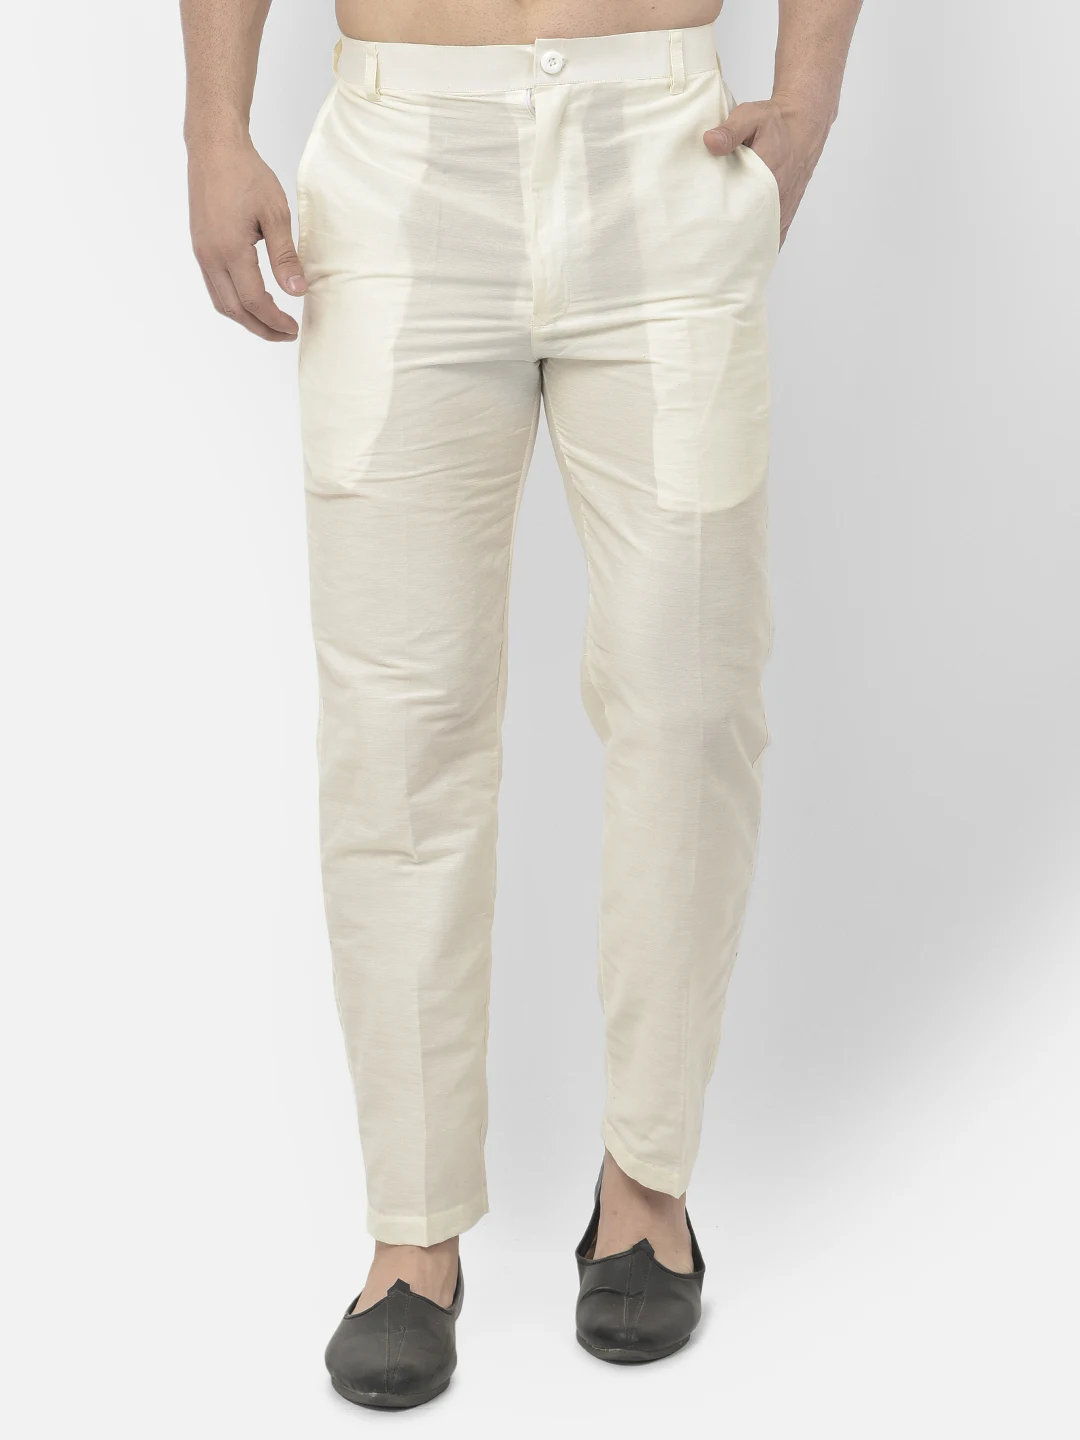 Buy Off White Trousers & Pants for Men by Code 61 Online | Ajio.com